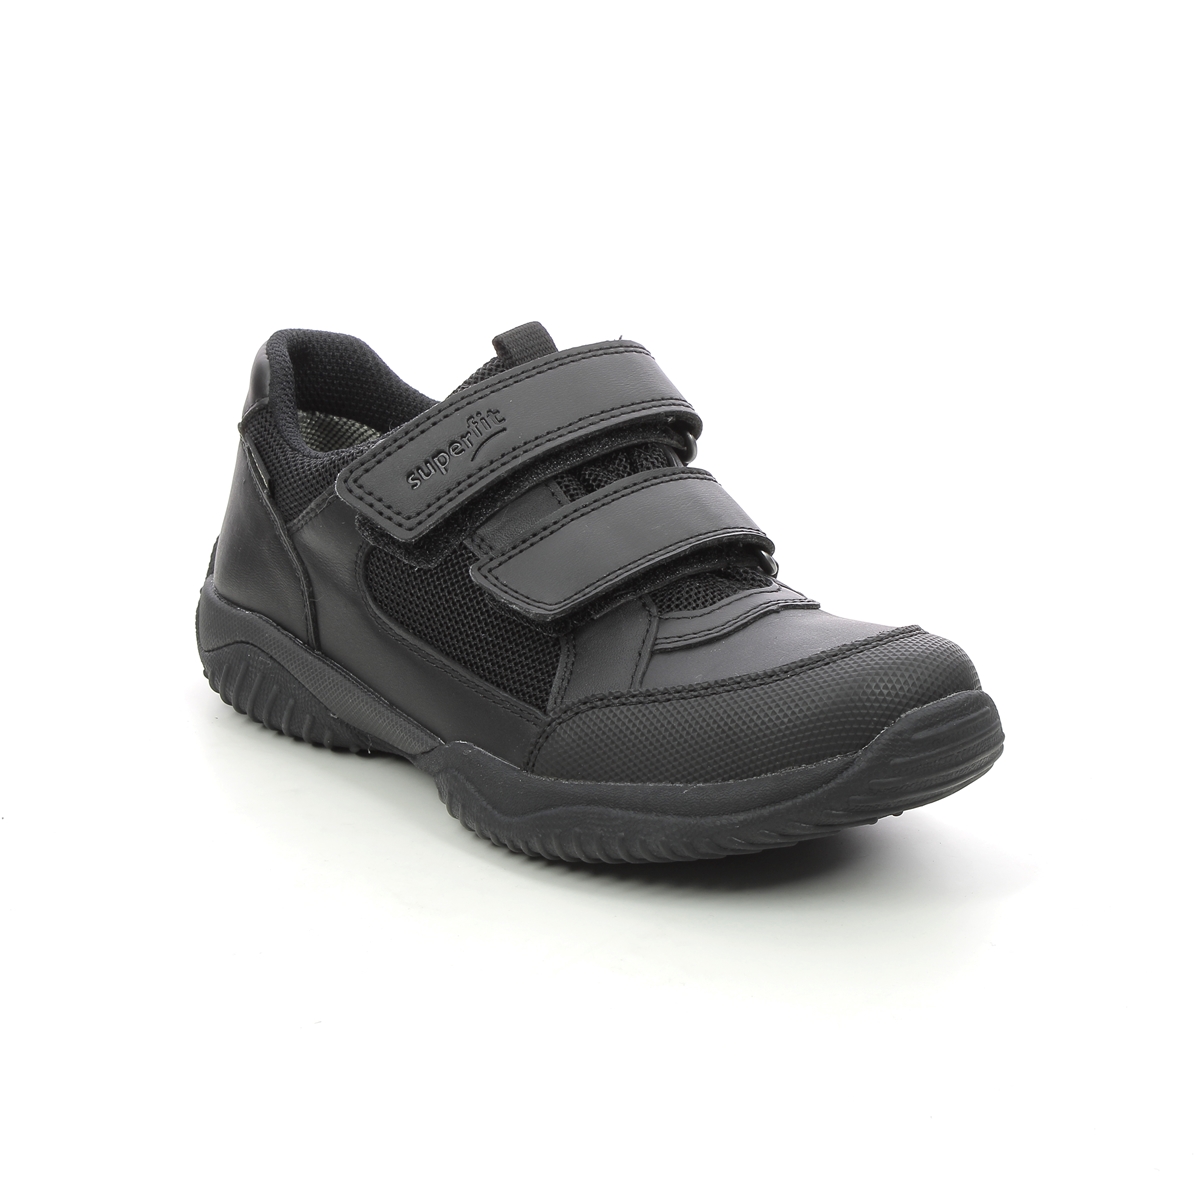 Superfit Storm Shoe Gtx Black Leather Kids Boys Casual Shoes 1009382-0000 In Size 29 In Plain Black Leather For kids